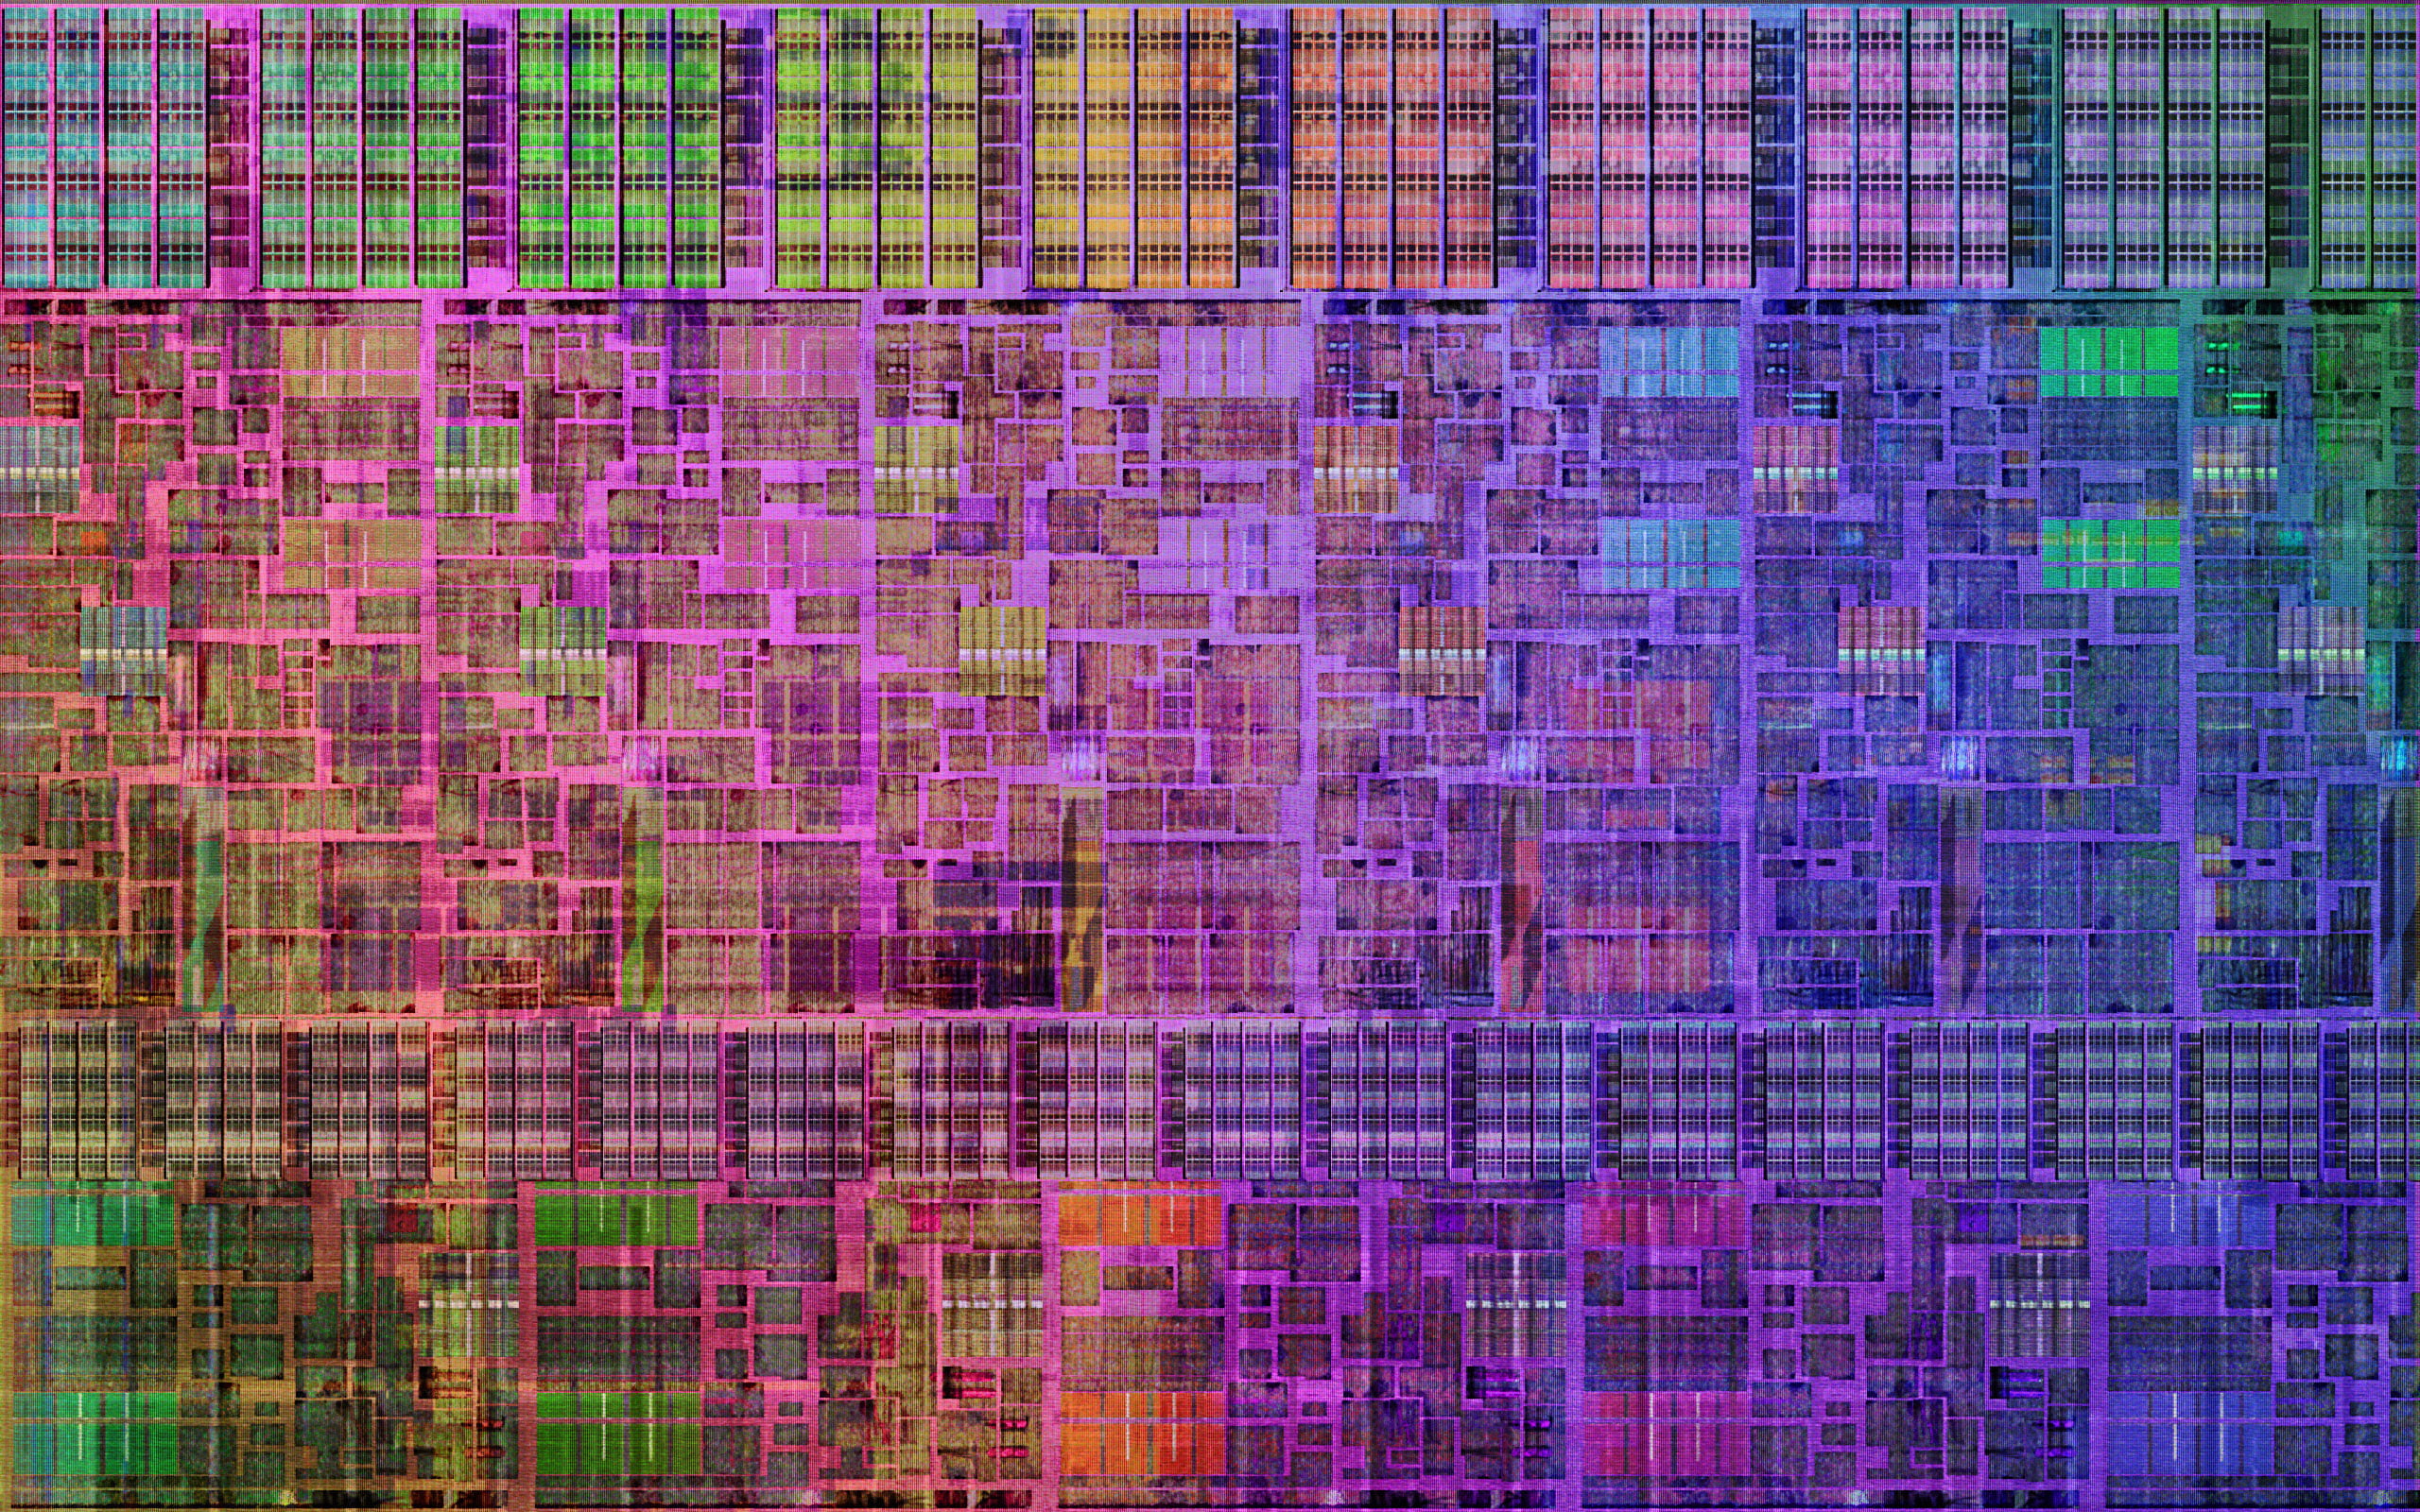 CPU, motherboards, chips, electricity, chromatic aberration